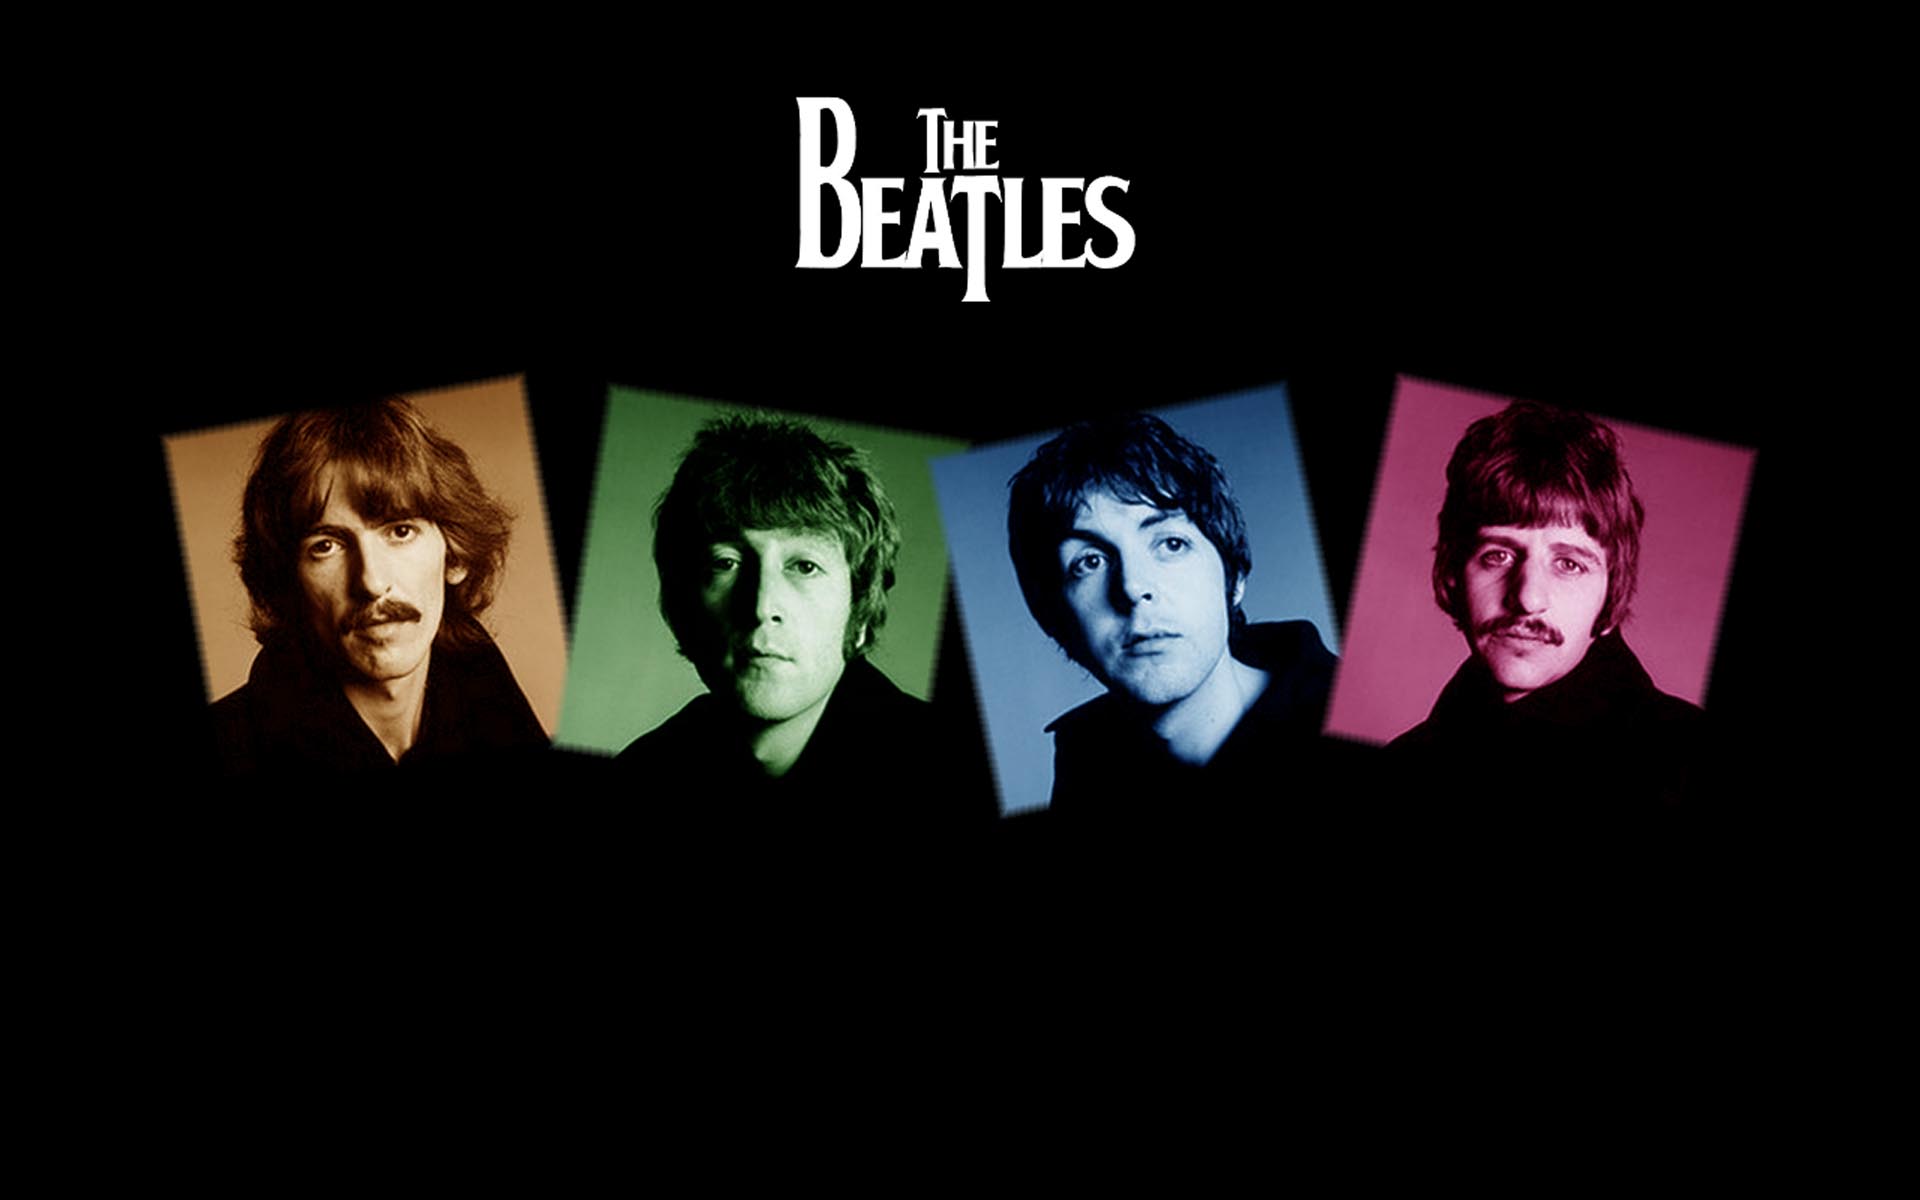 The Beatles Wallpaper High Quality